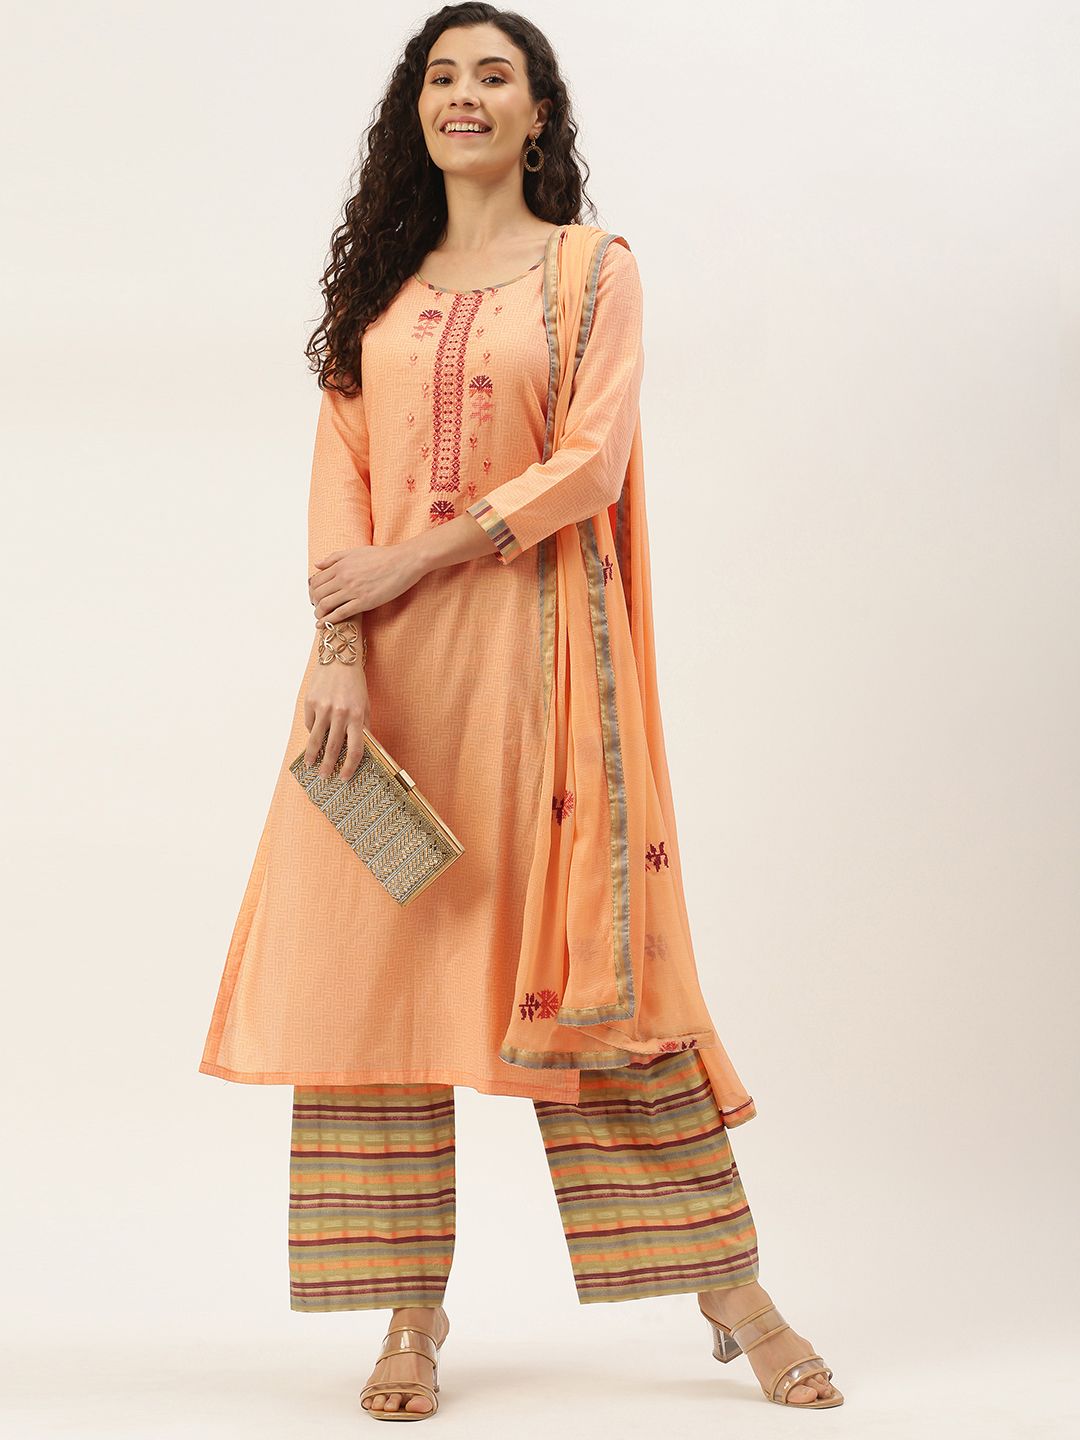 SheWill Orange & Green Printed Unstitched Dress Material Price in India